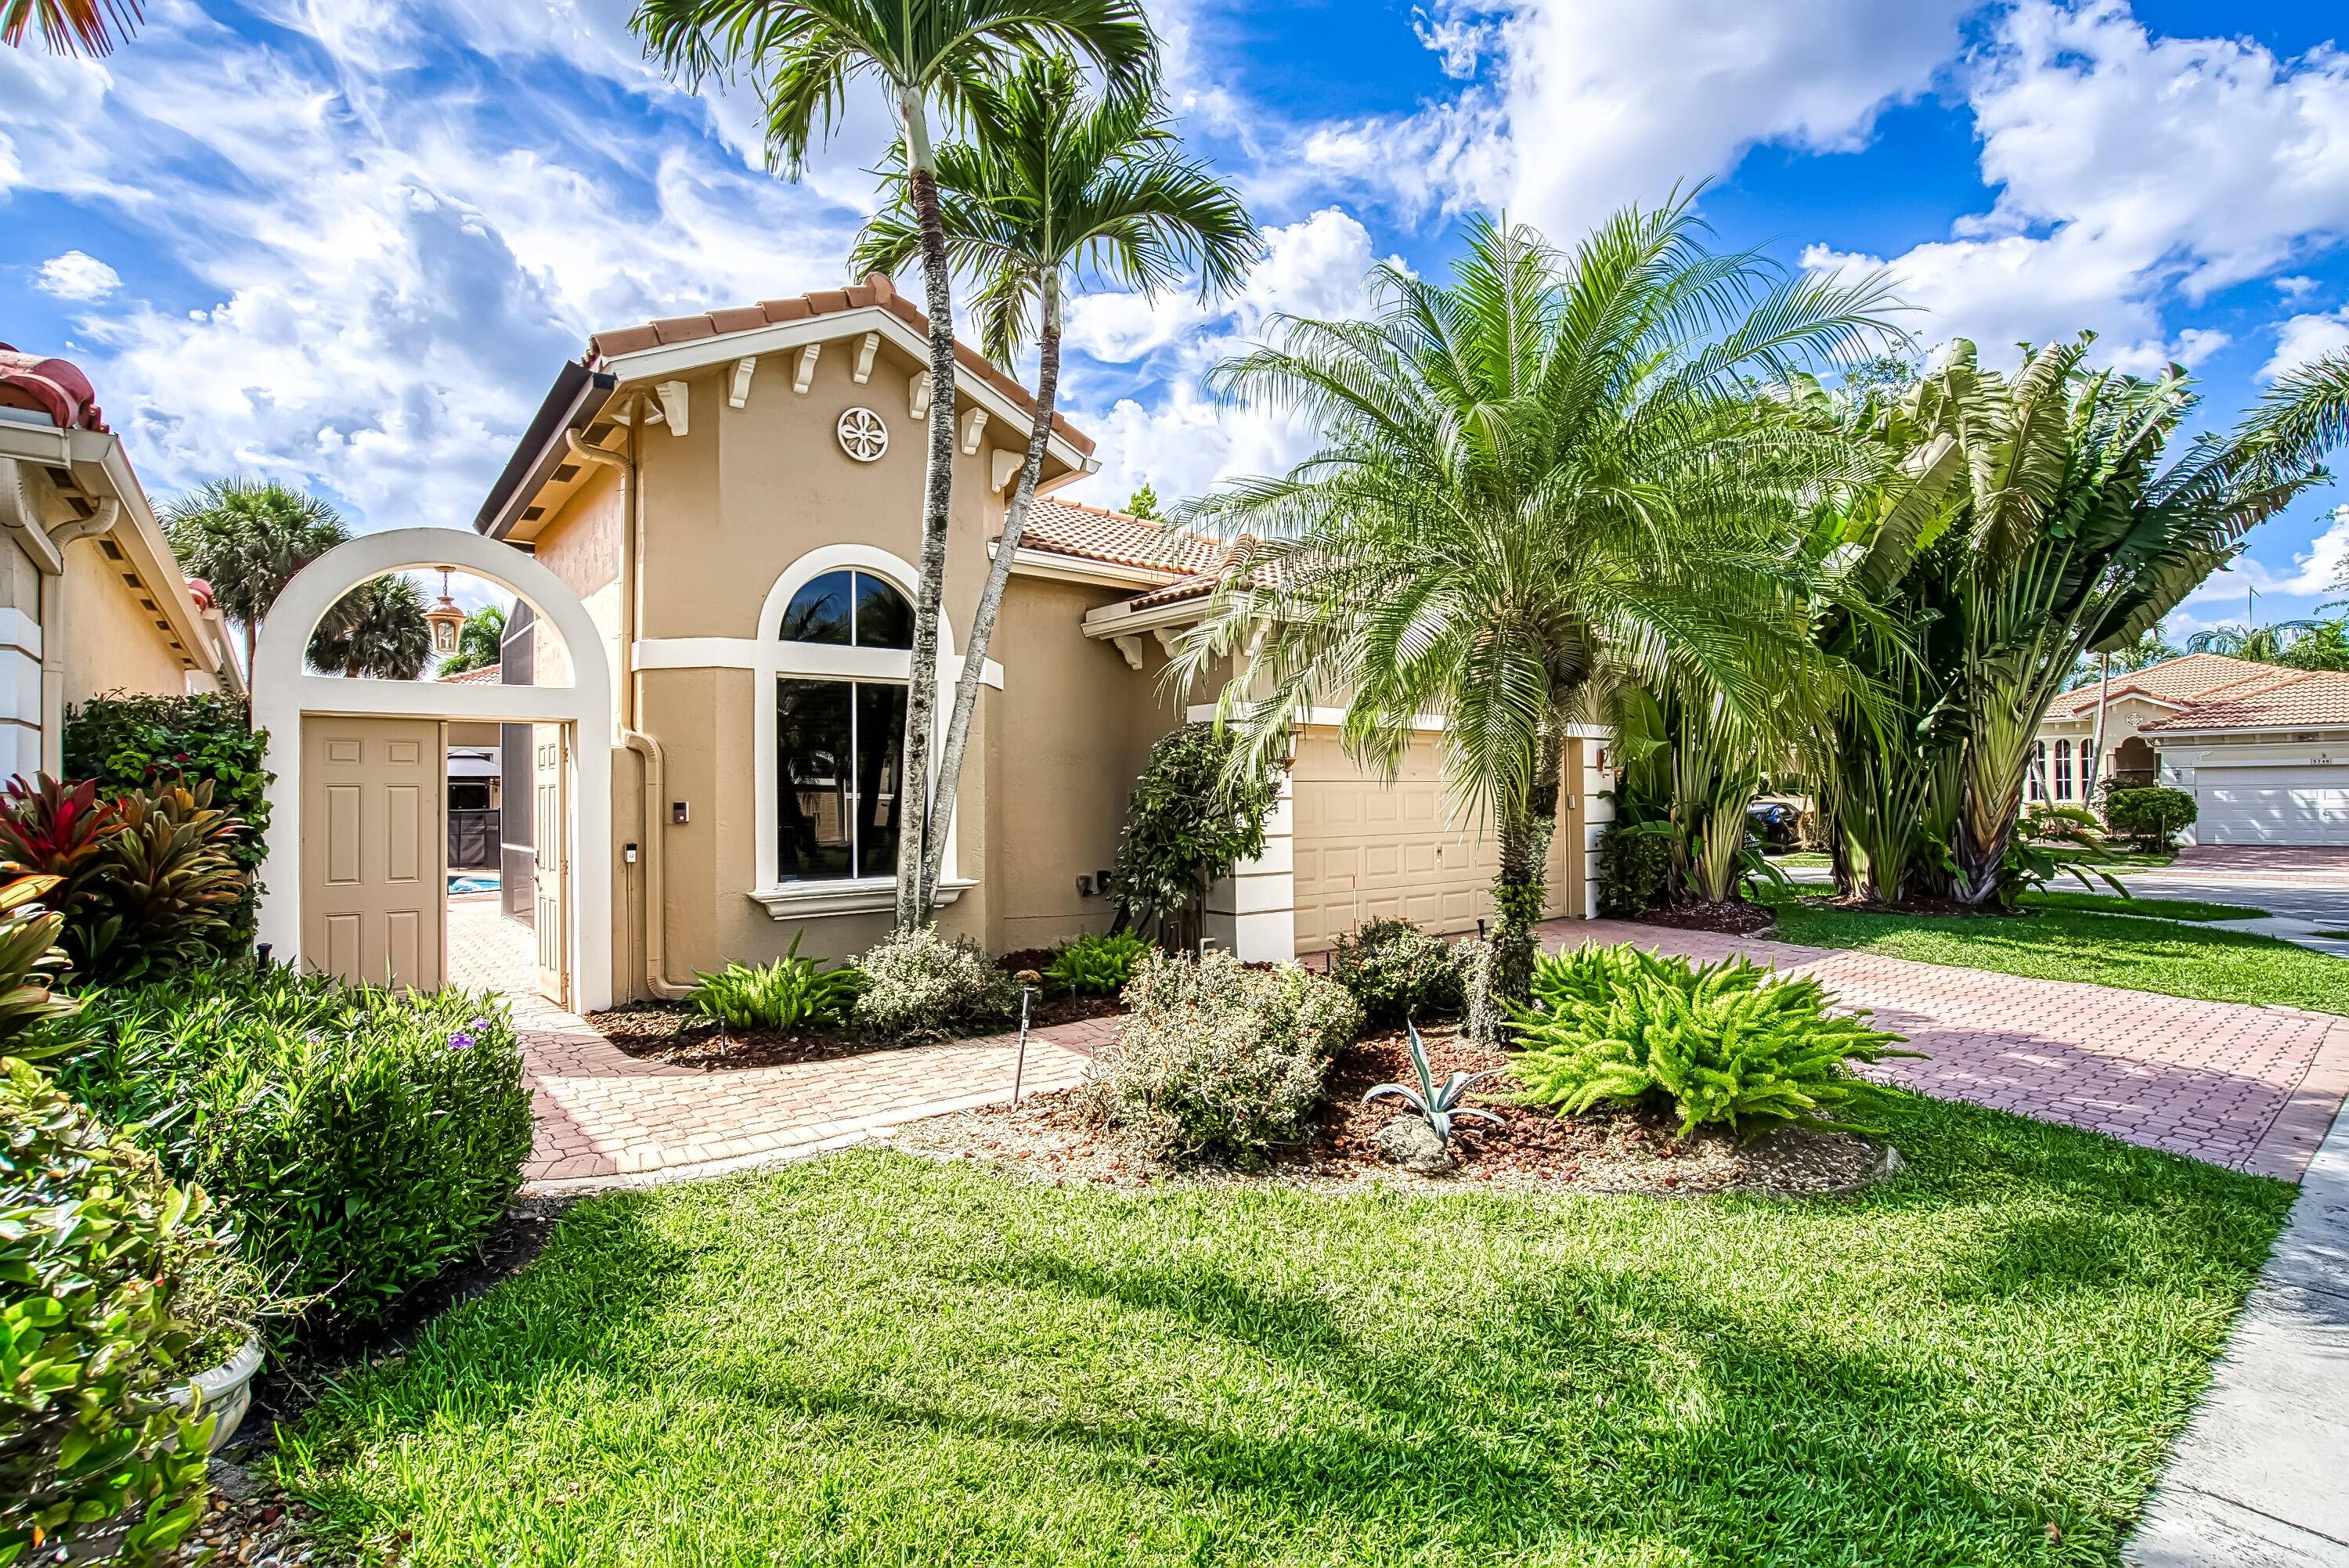 New on the market, 4 Bedrooms, 3 Baths, 2, 762 sq ft of building area, meticulously maintained home with a pool, on an oversized corner lot, in the prestigious, desirable, ...